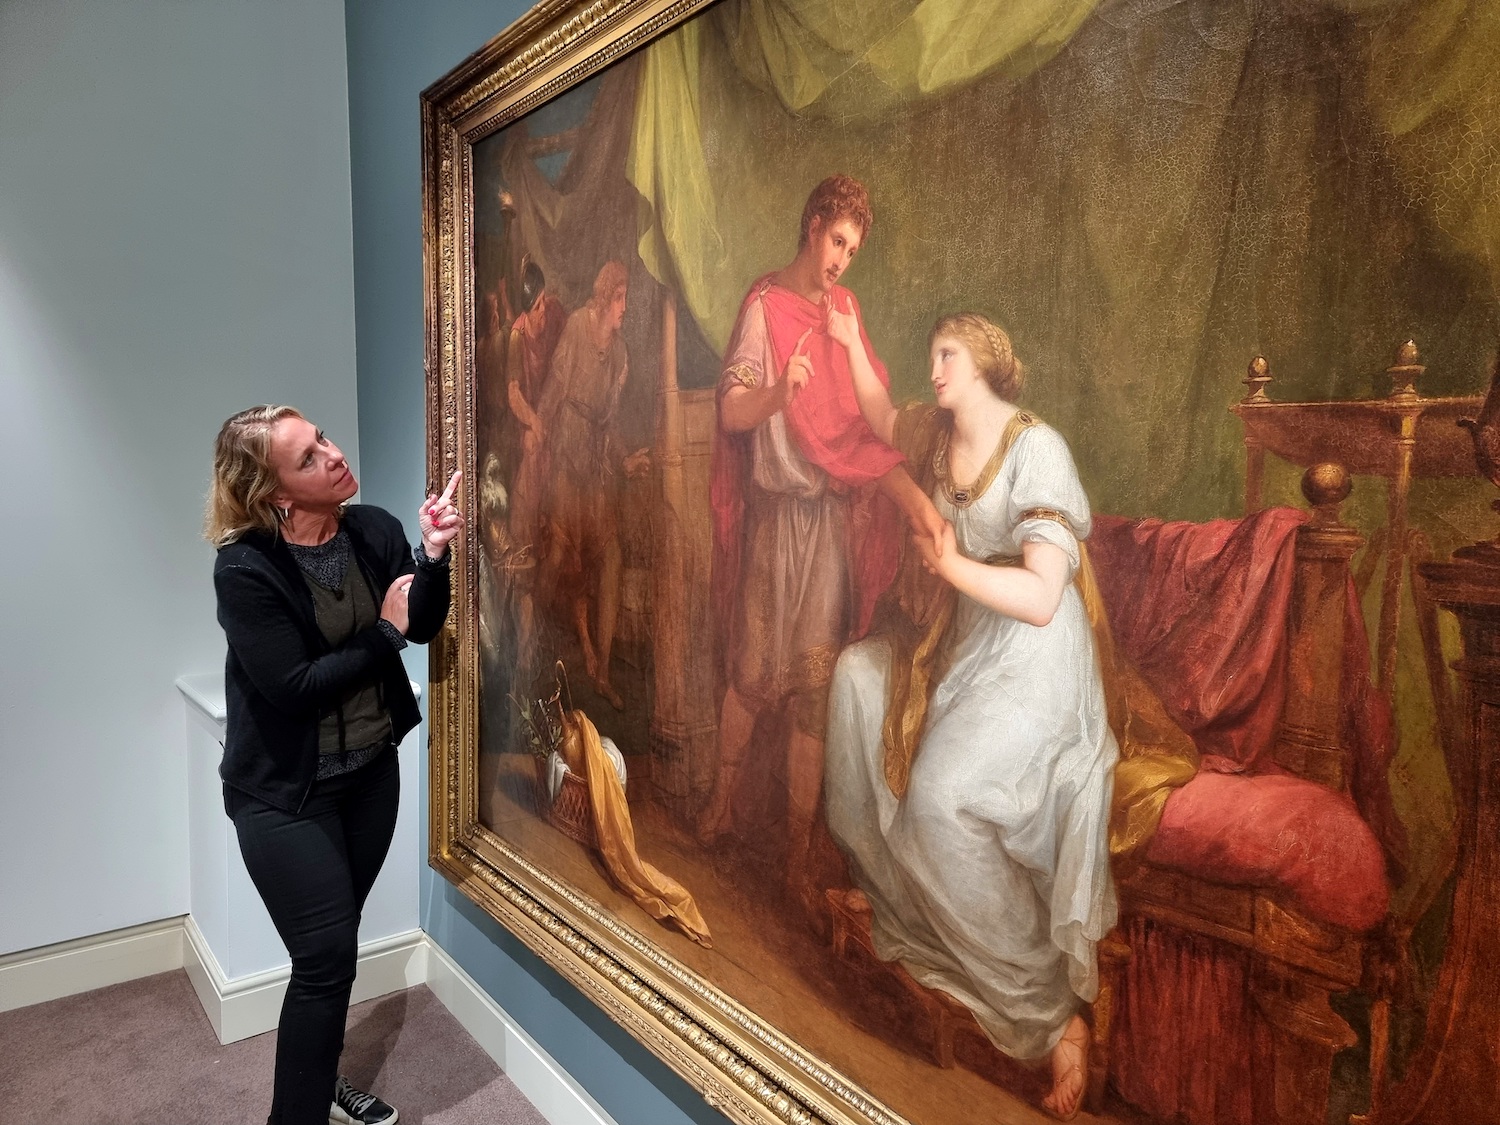 Conservator Sophie Reddington with conserved Diomedes and Cressida painting at Petworth